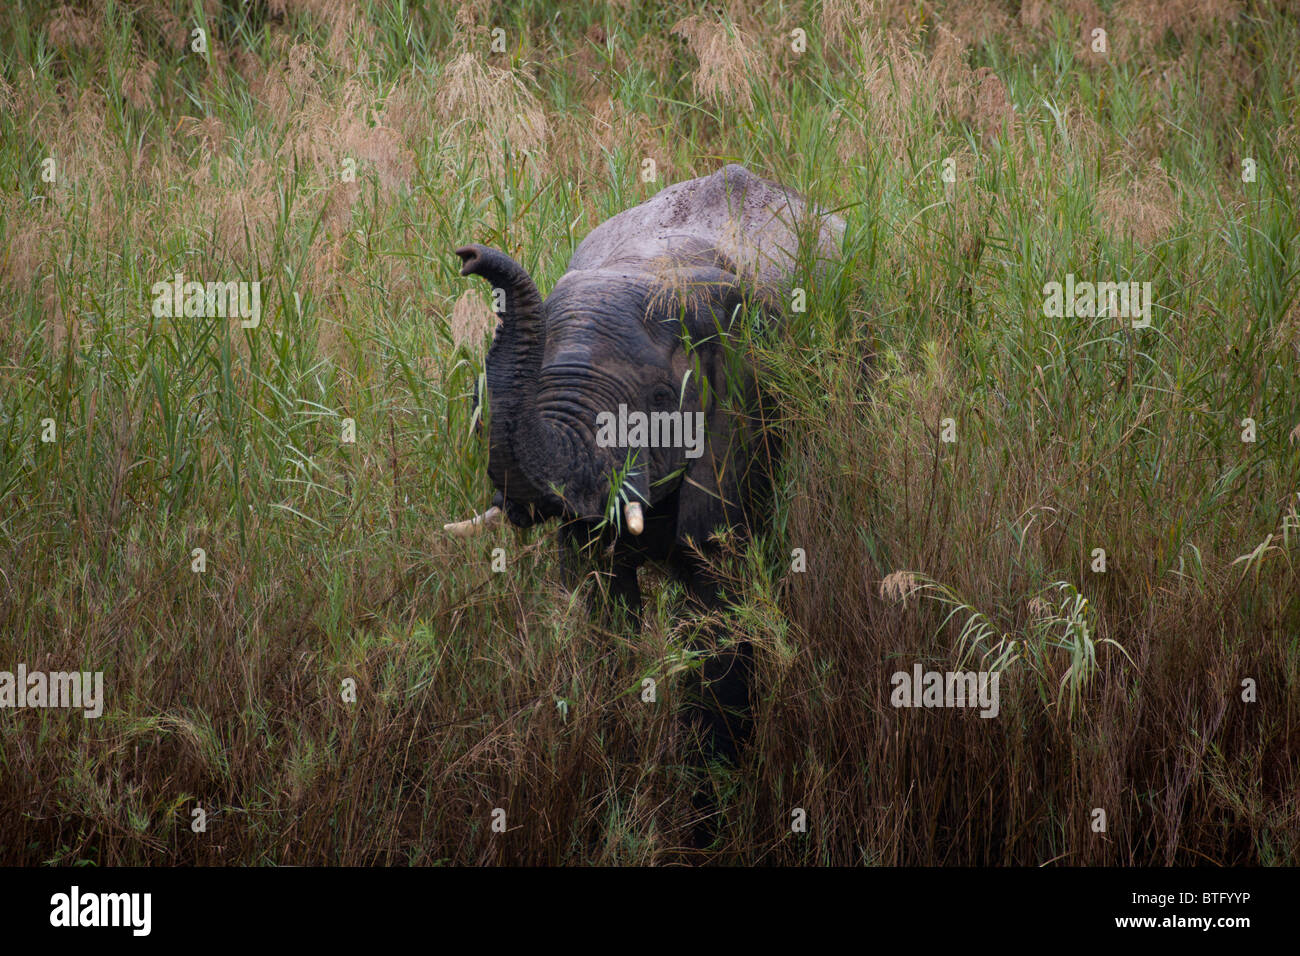 Elephant in the Marsh Reeds on the Bank of the Oliphant River Stock Photo